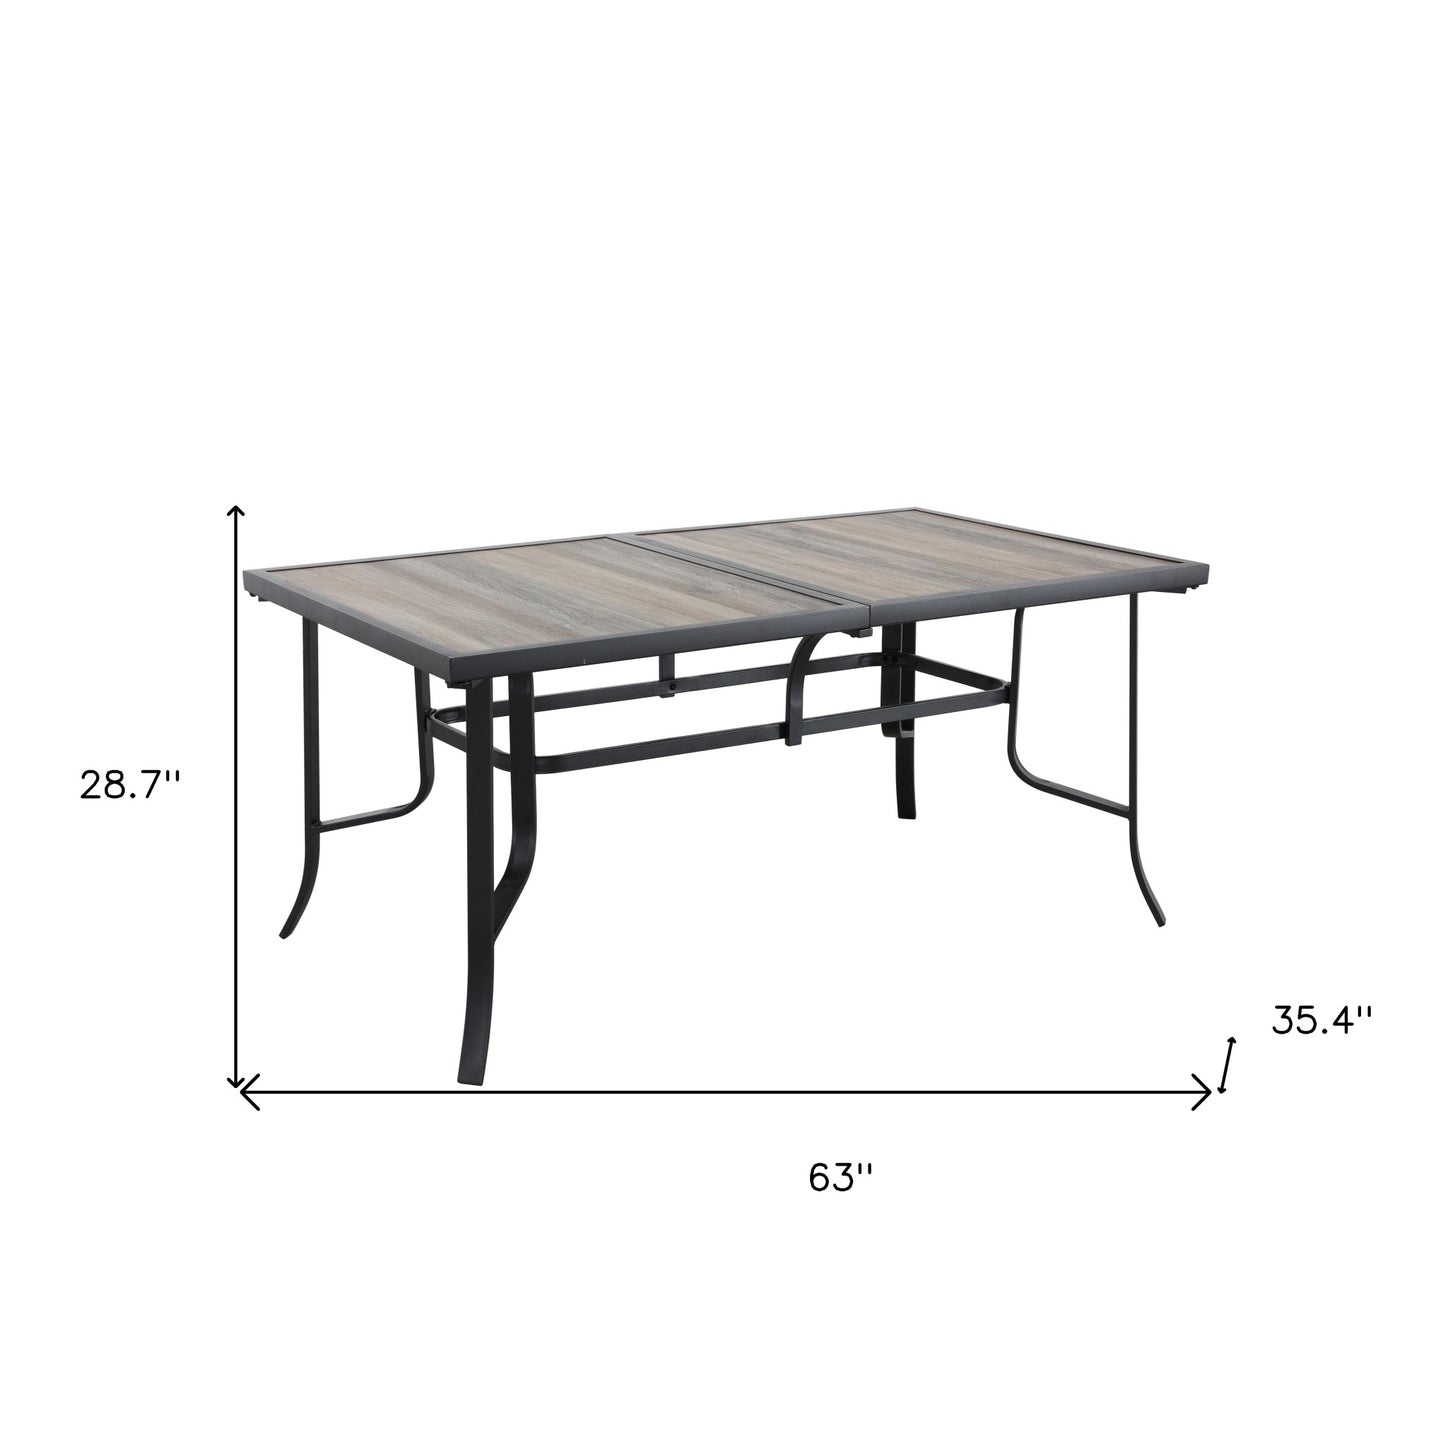 63" Brown and Black Metal Outdoor Dining Table